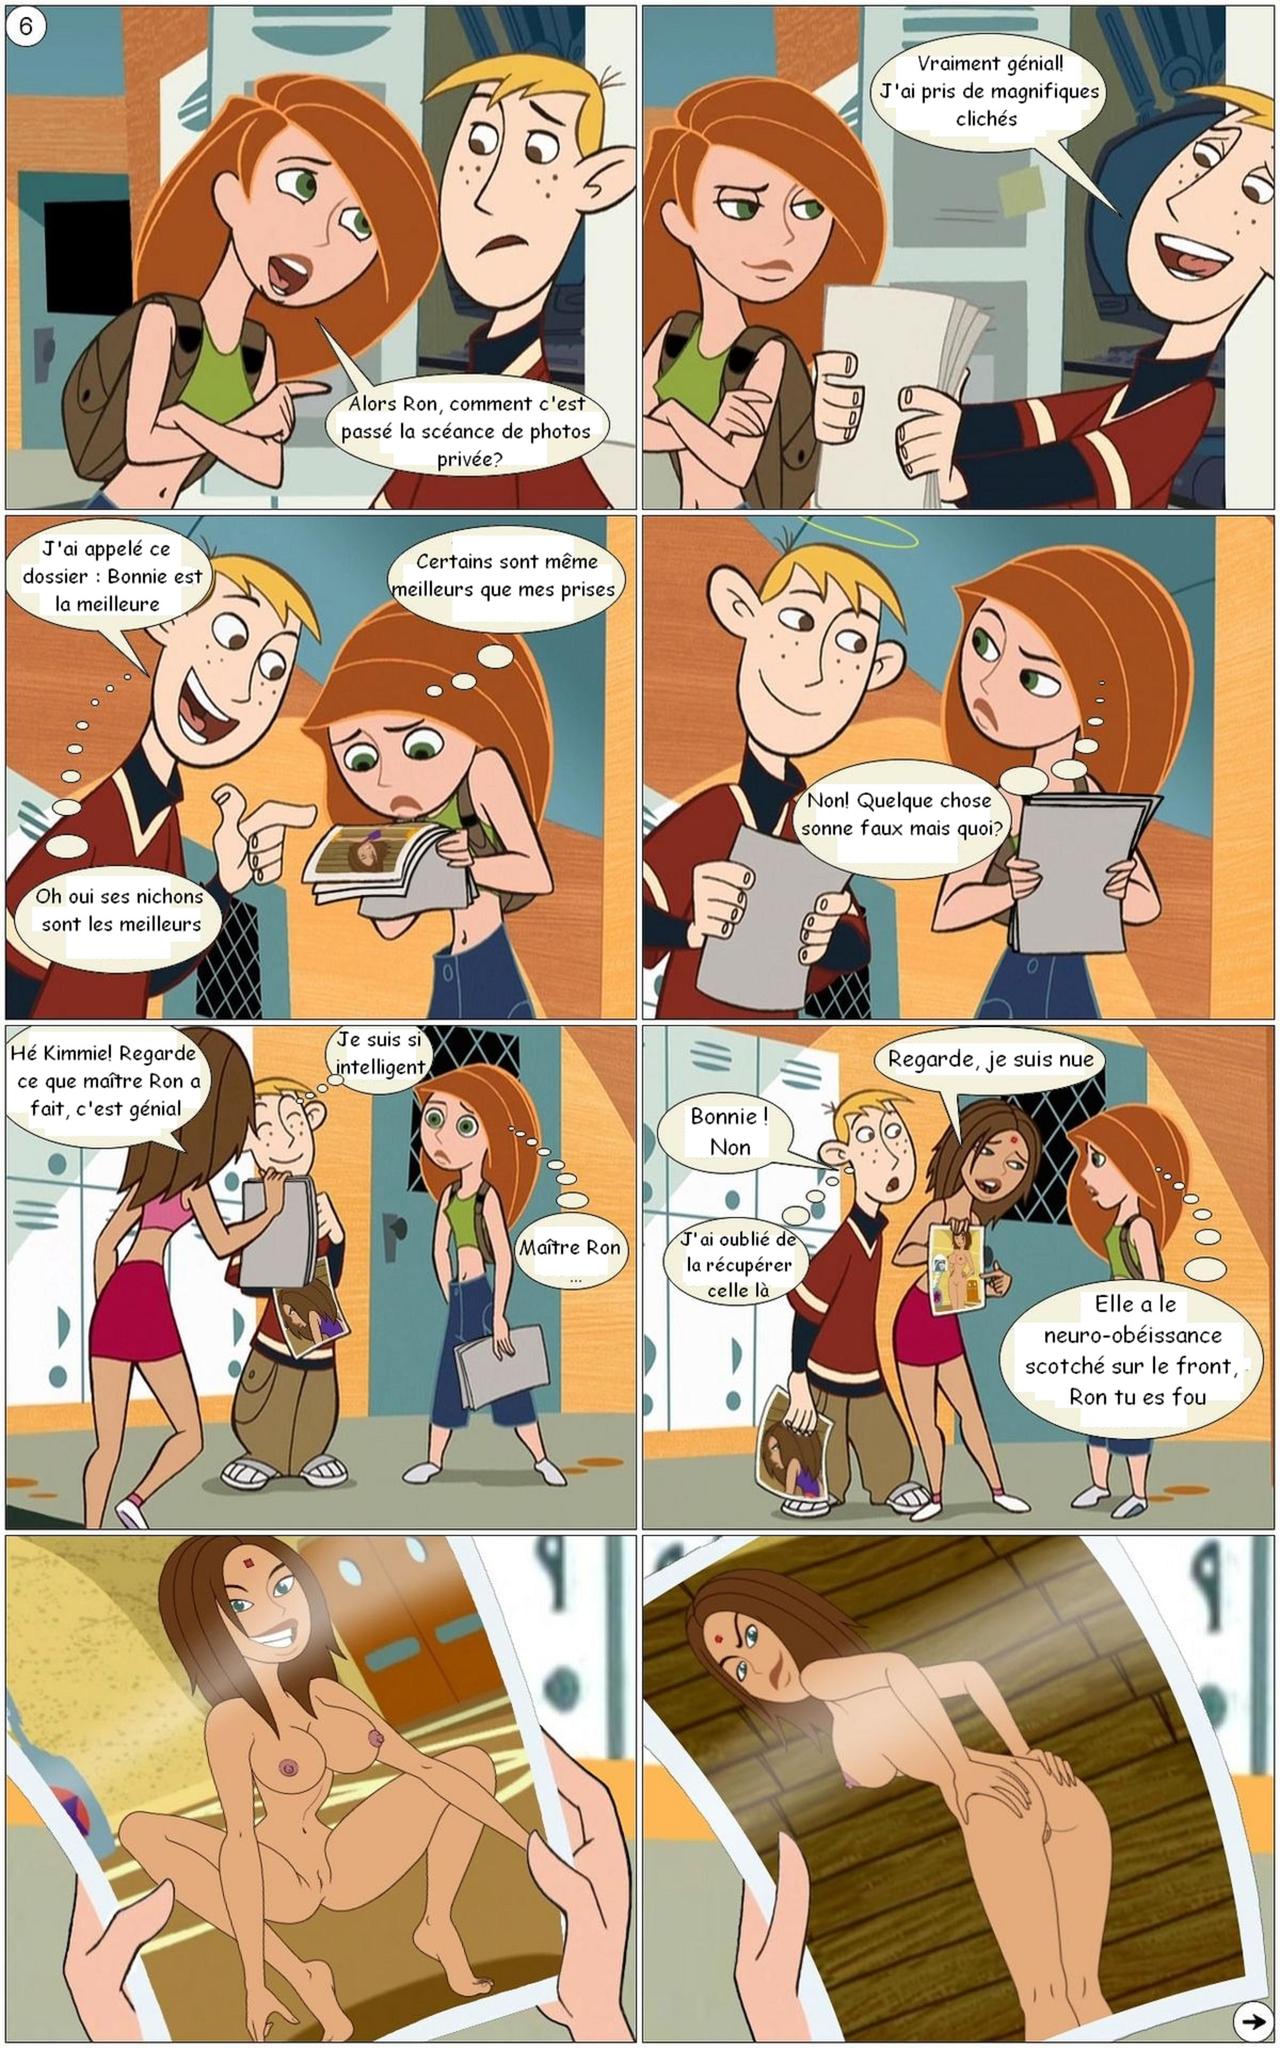 [Gagala] Photography Class (Kim Possible) [French] 